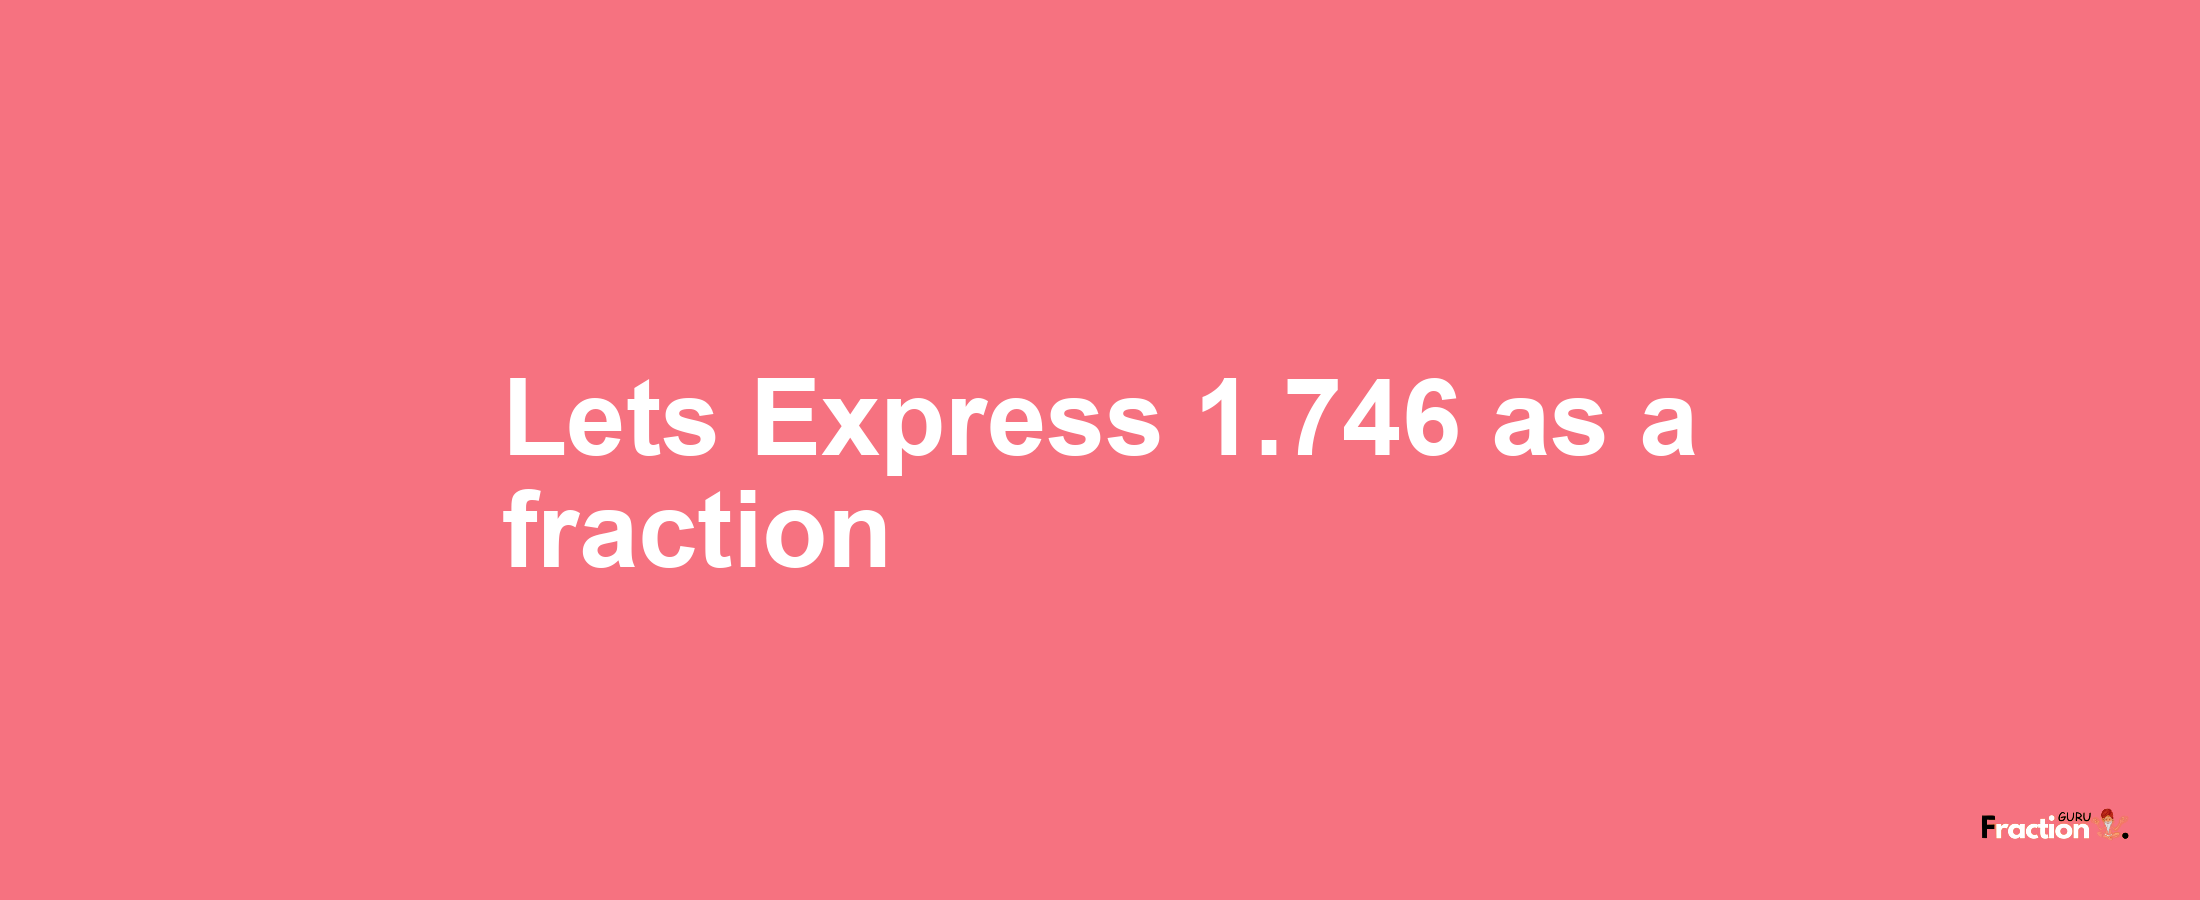 Lets Express 1.746 as afraction